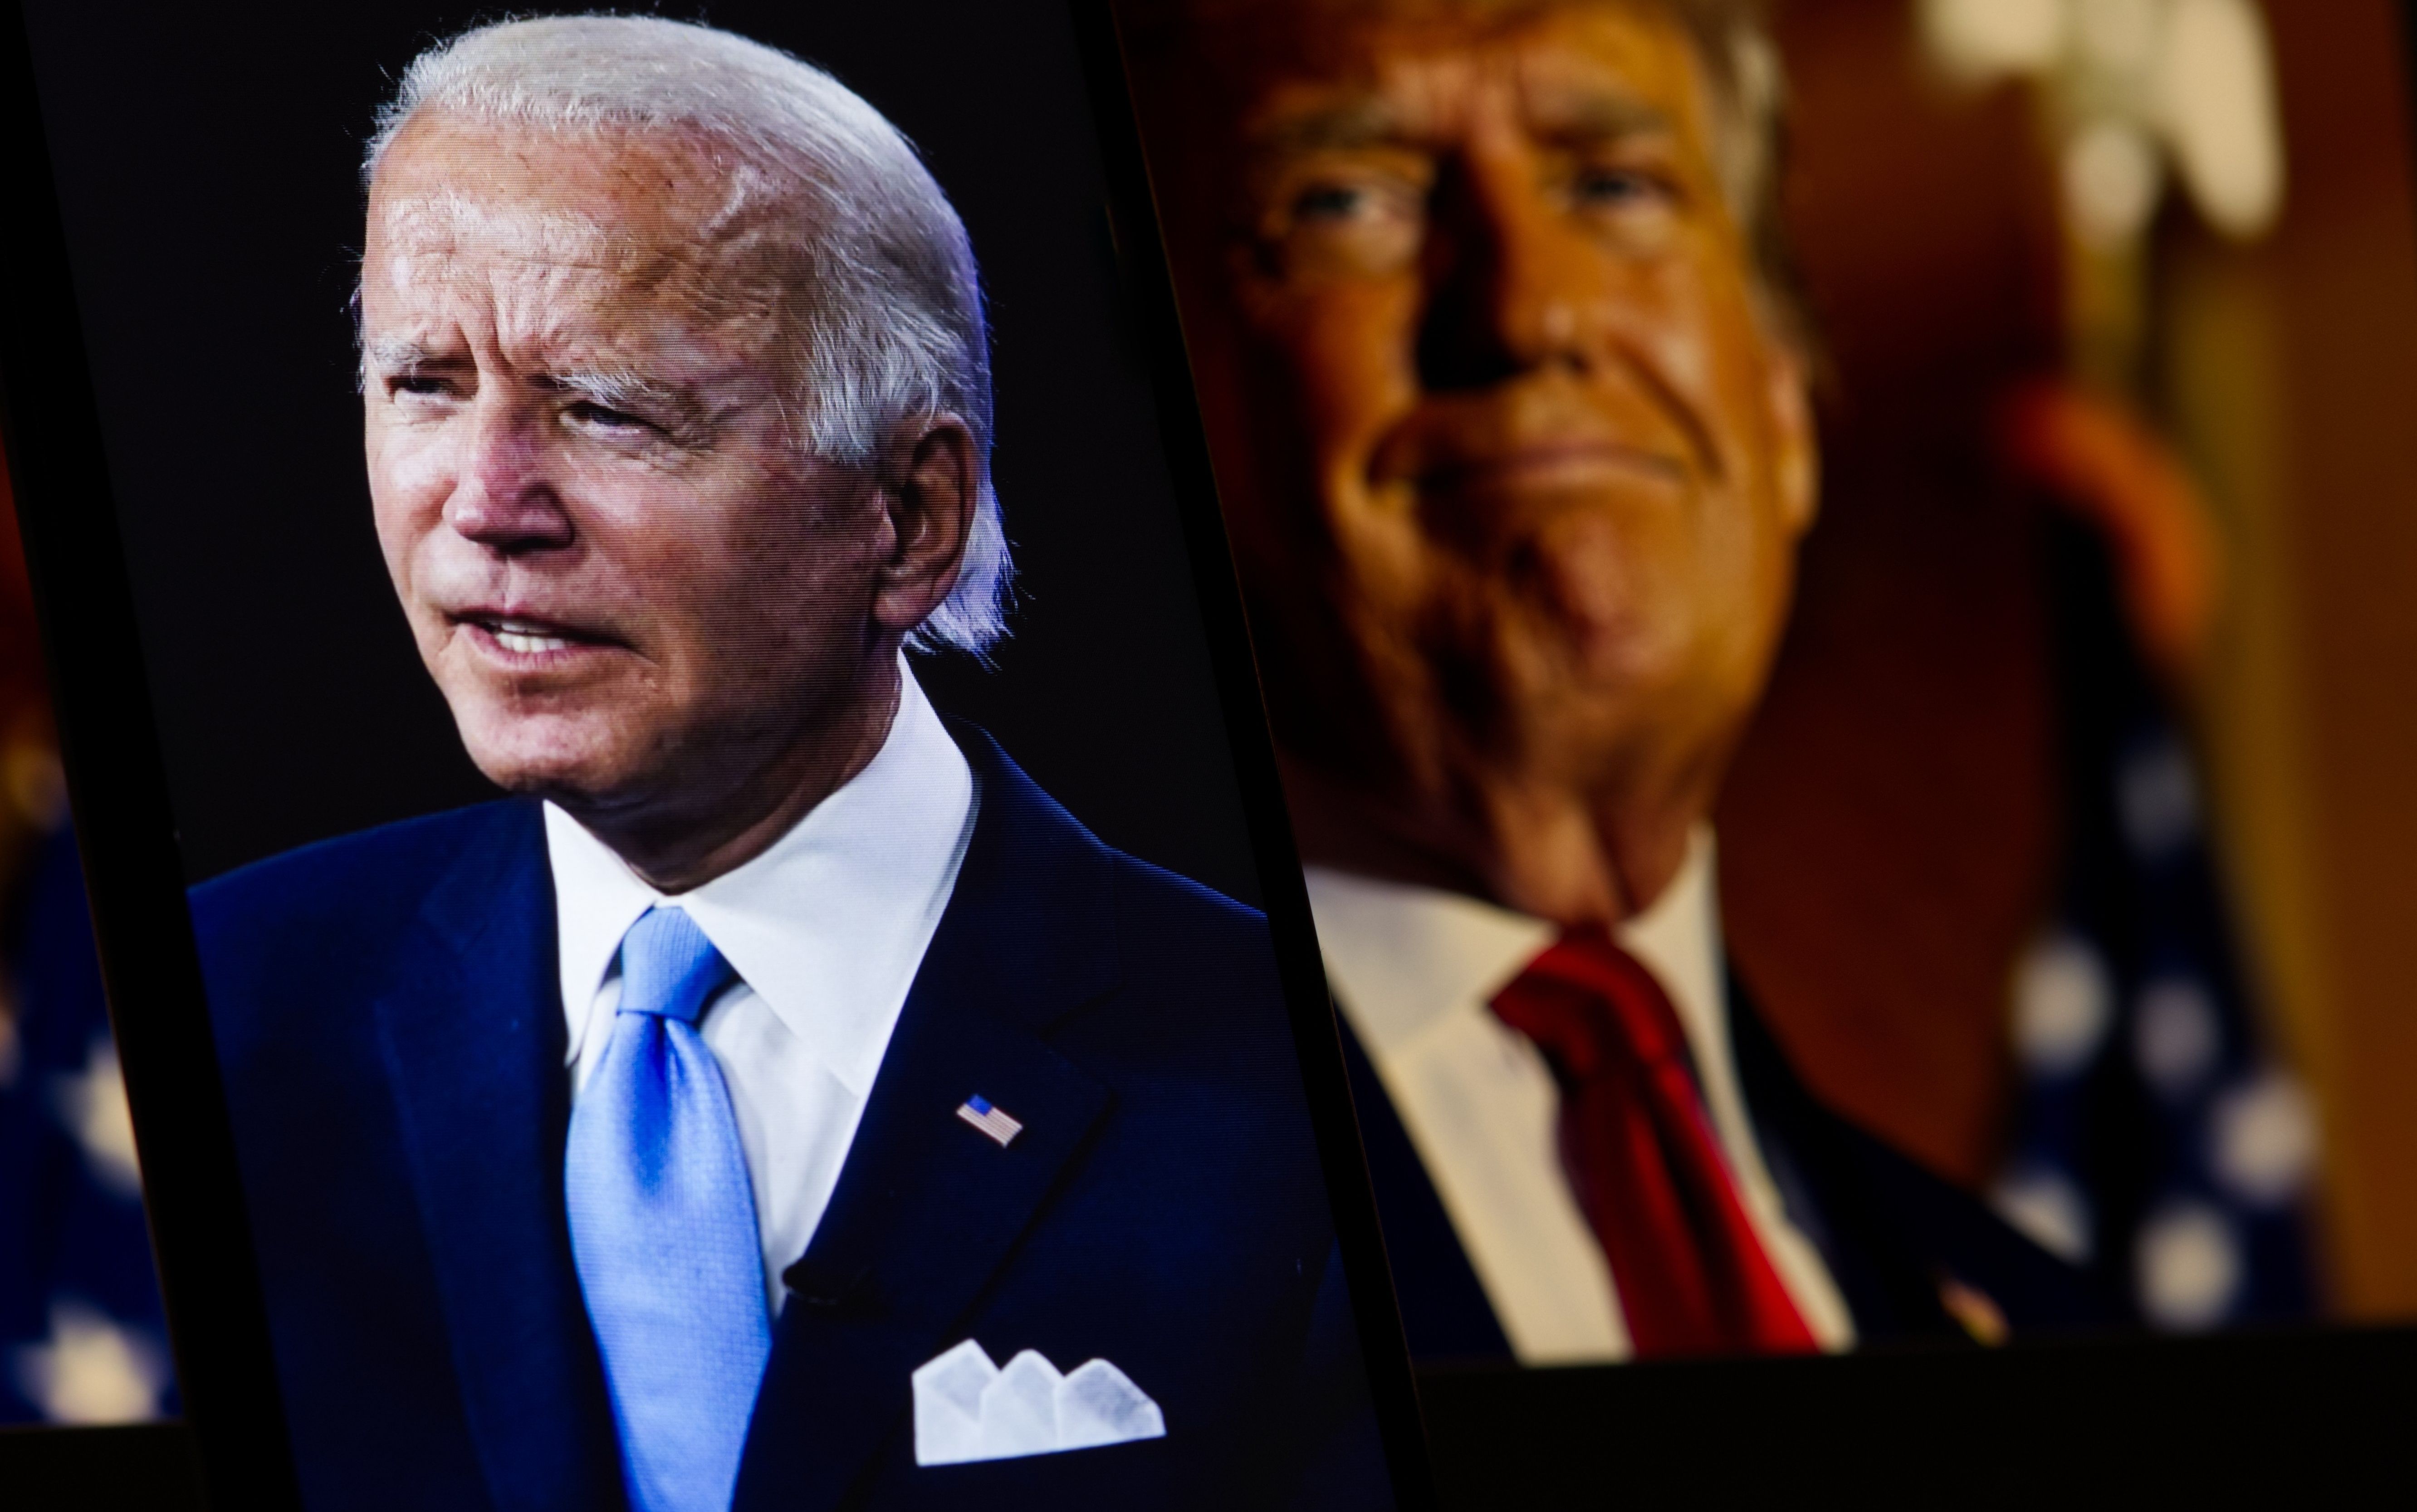 Biden had a chance to undo Trump's mistakes. He dropped the ball.